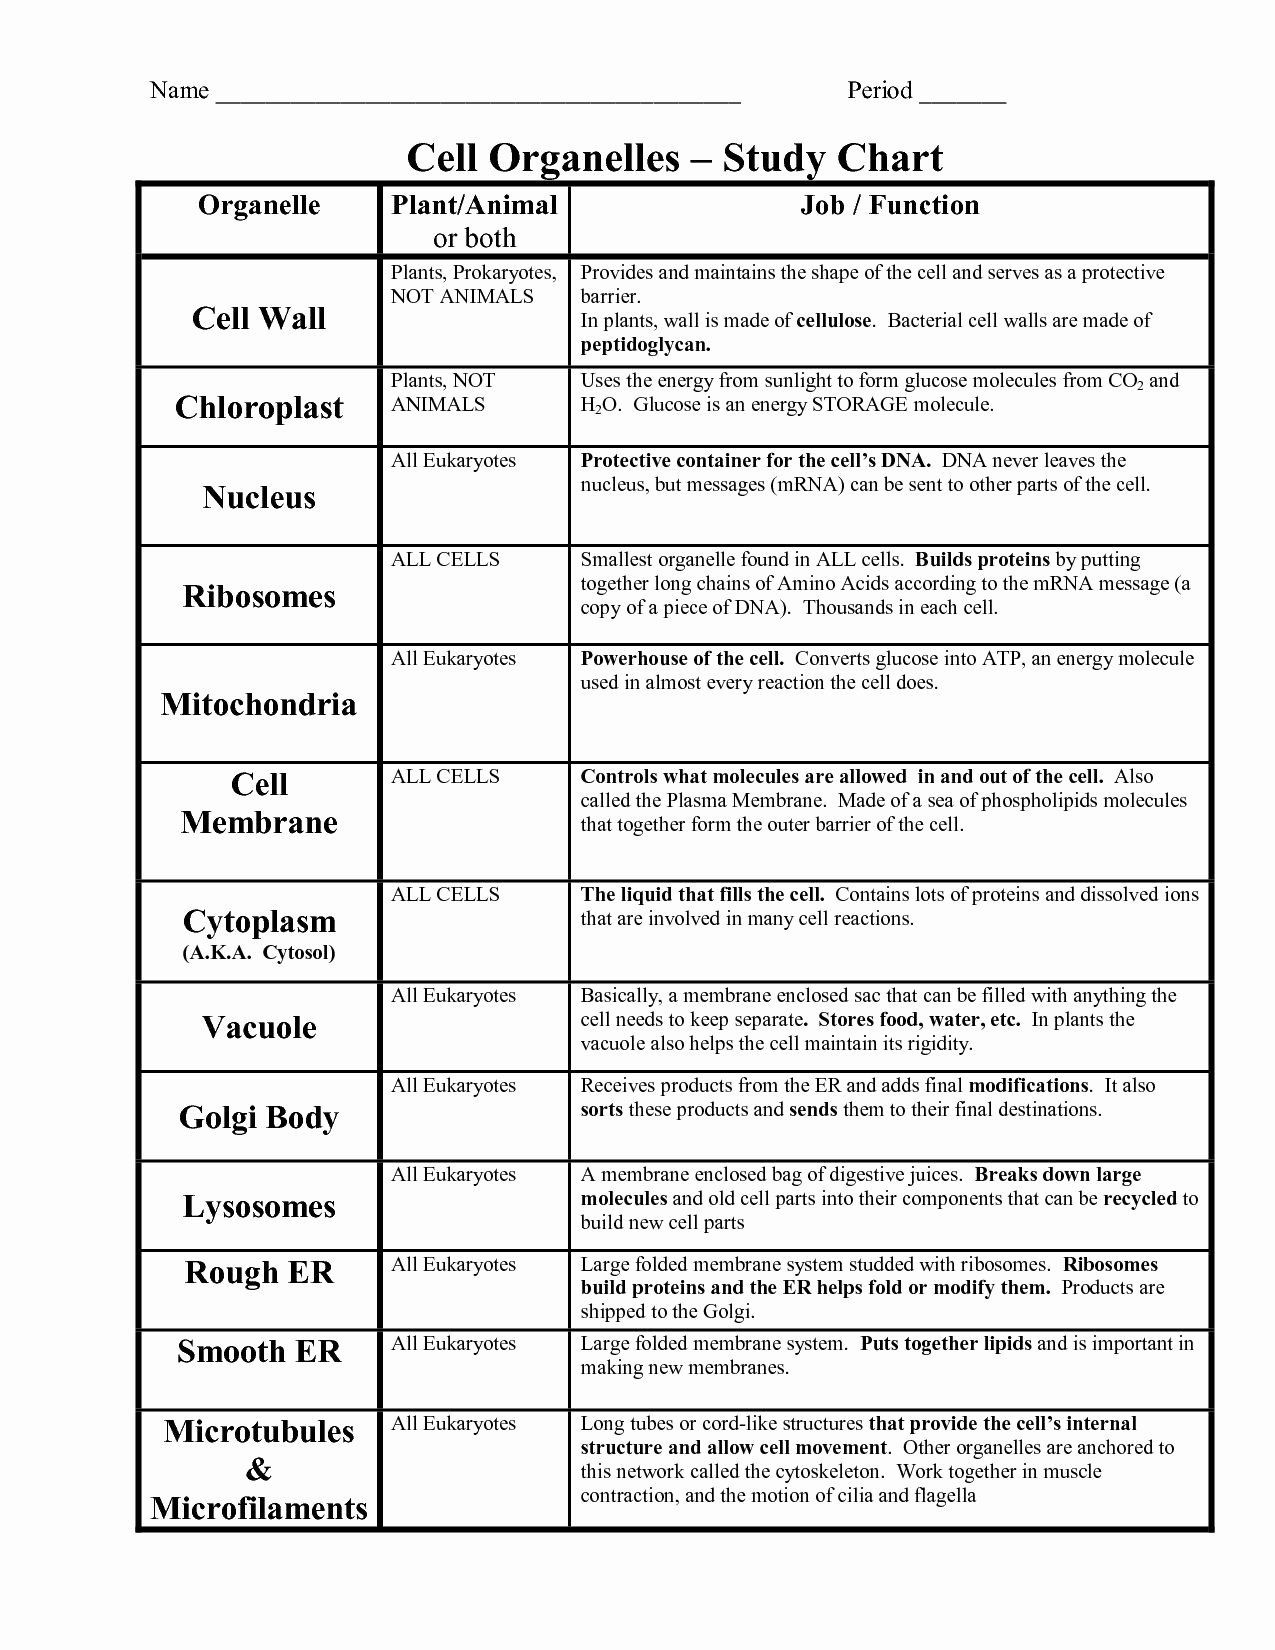 Cell organelles Worksheet Answers 50 Dna Replication Worksheet Answers In 2020